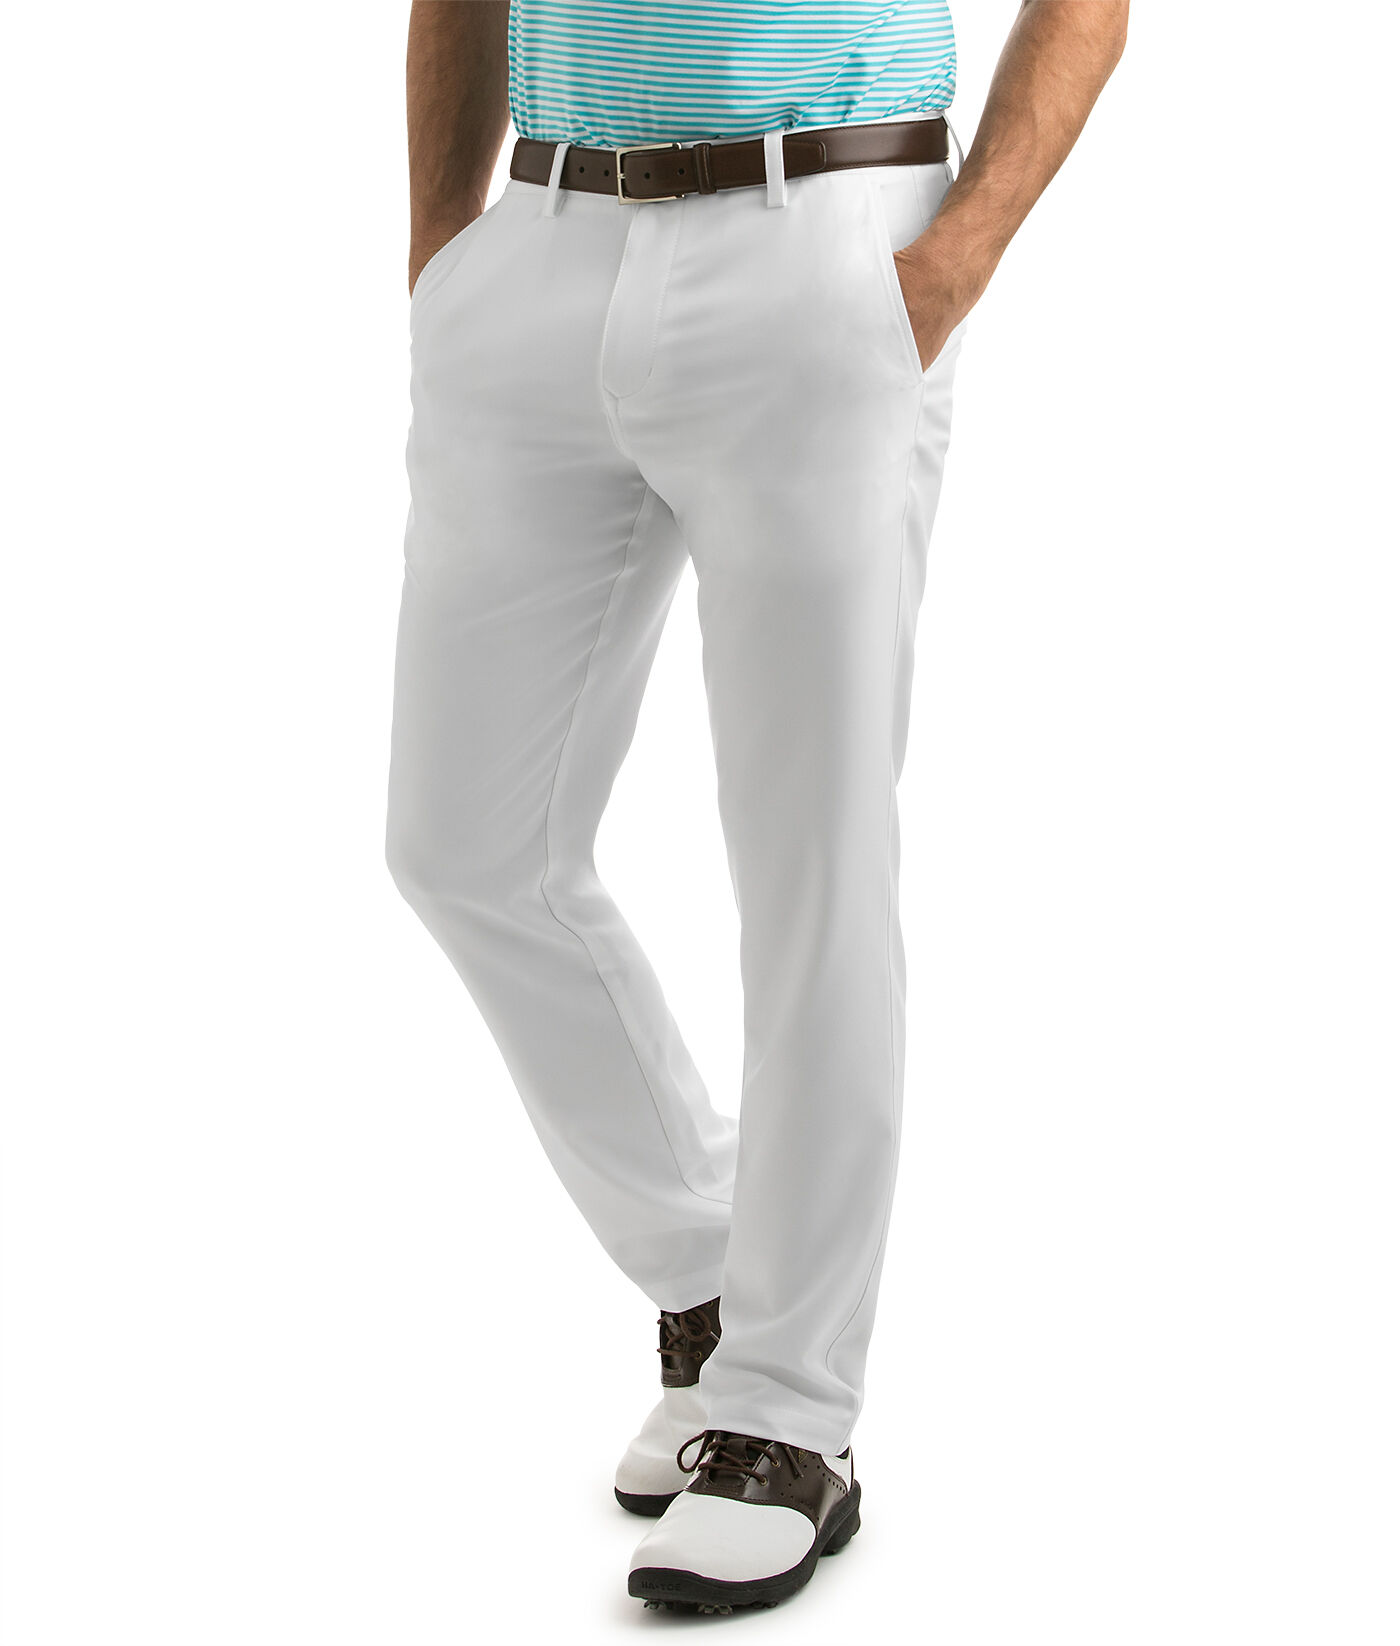 Charcoal Tech Golf Pants With FREE Delivery - From the linksland